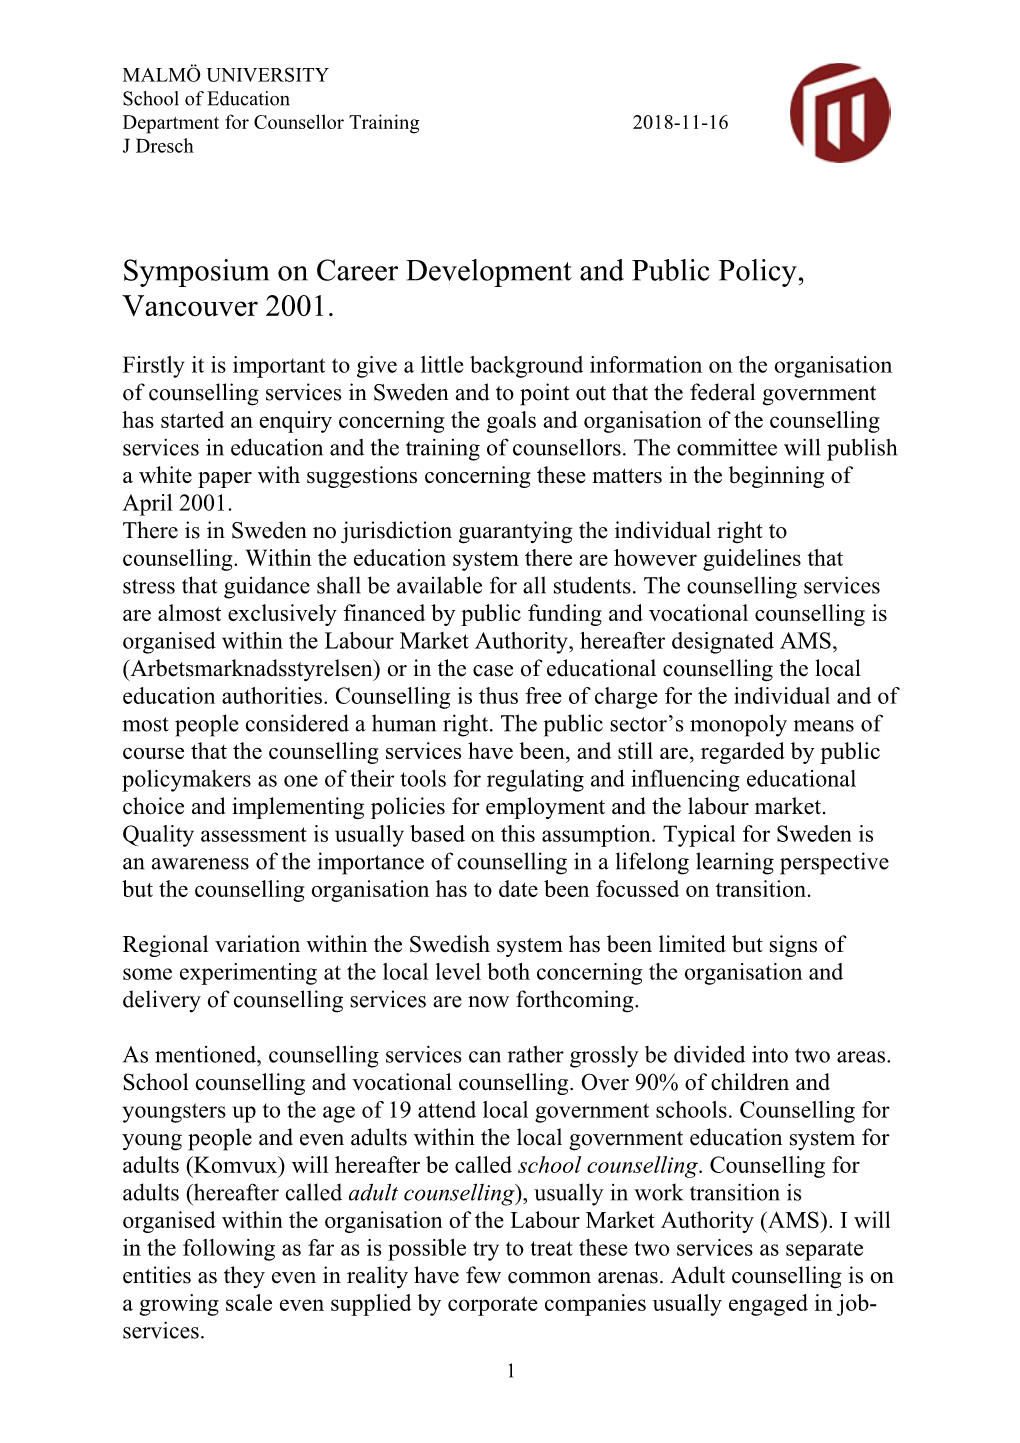 Symposium on Career Development and Public Policy, Vancouver 2001